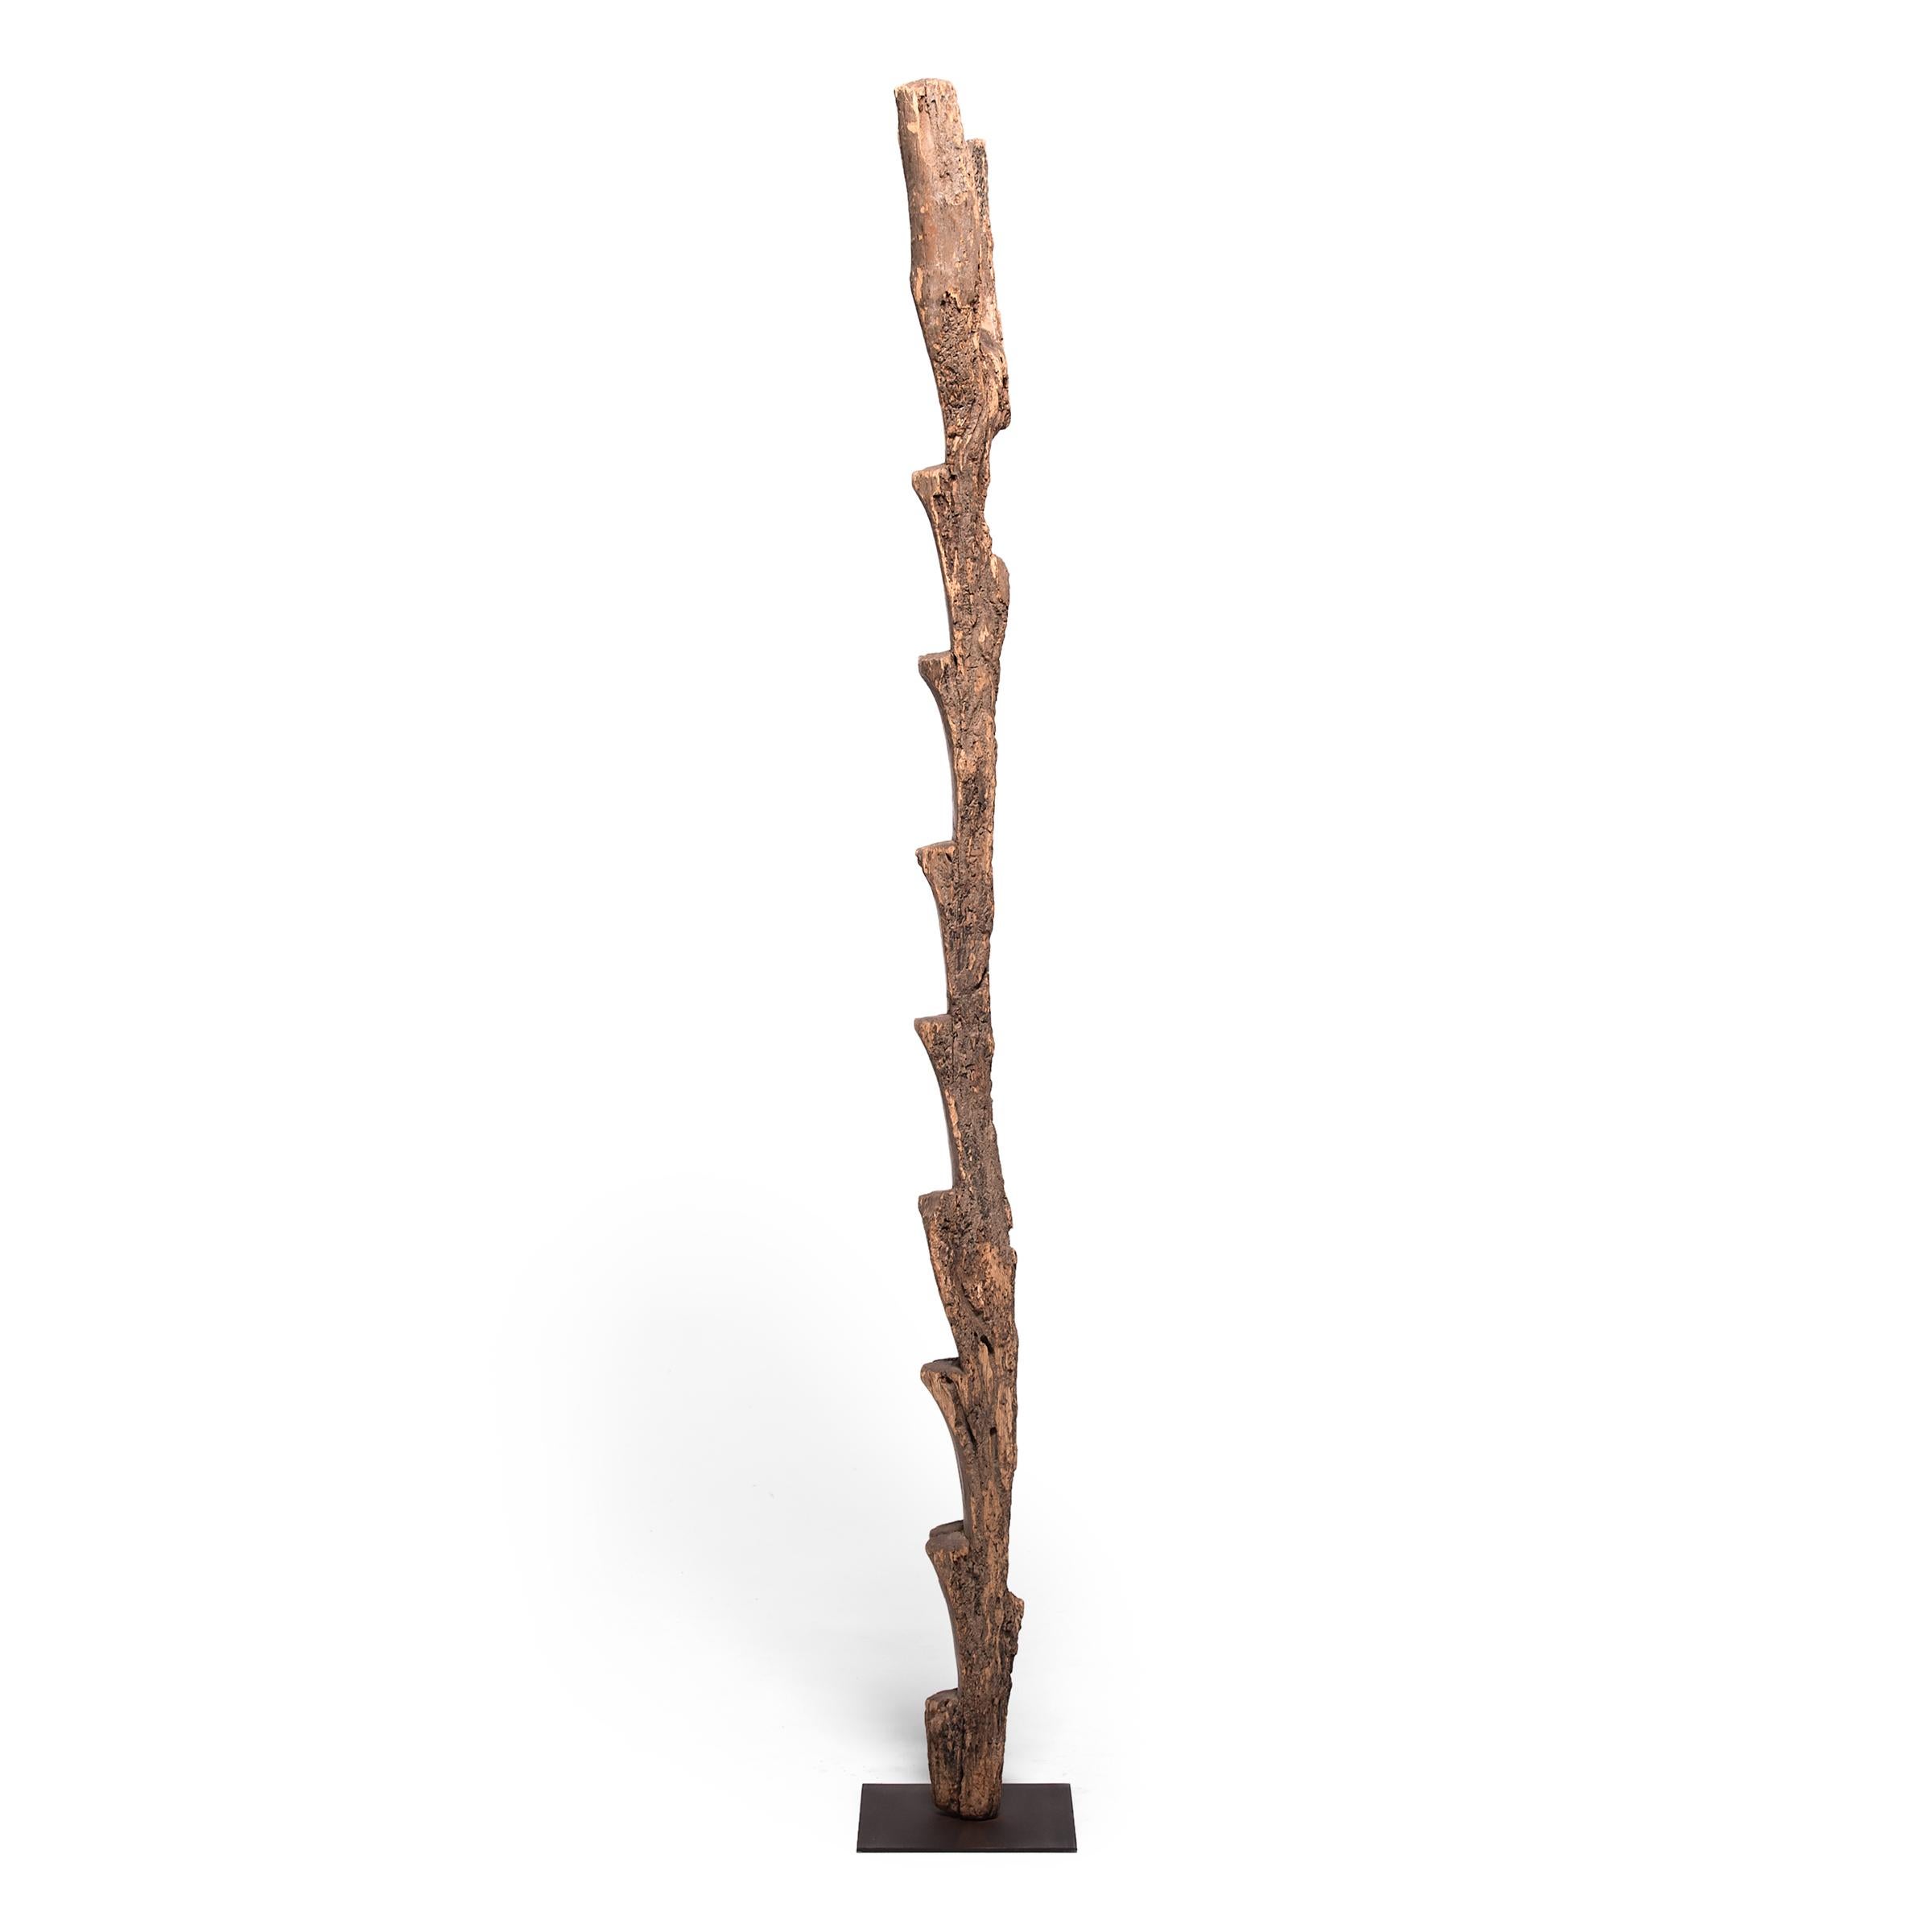 The Dogon people of Mali lived a vertical life. With homes set into cliff faces and orchards to harvest, tree ladders were integral tools of daily life. Adding depth and texture, a pattern of well-worn steps darkens the wood, balanced by the